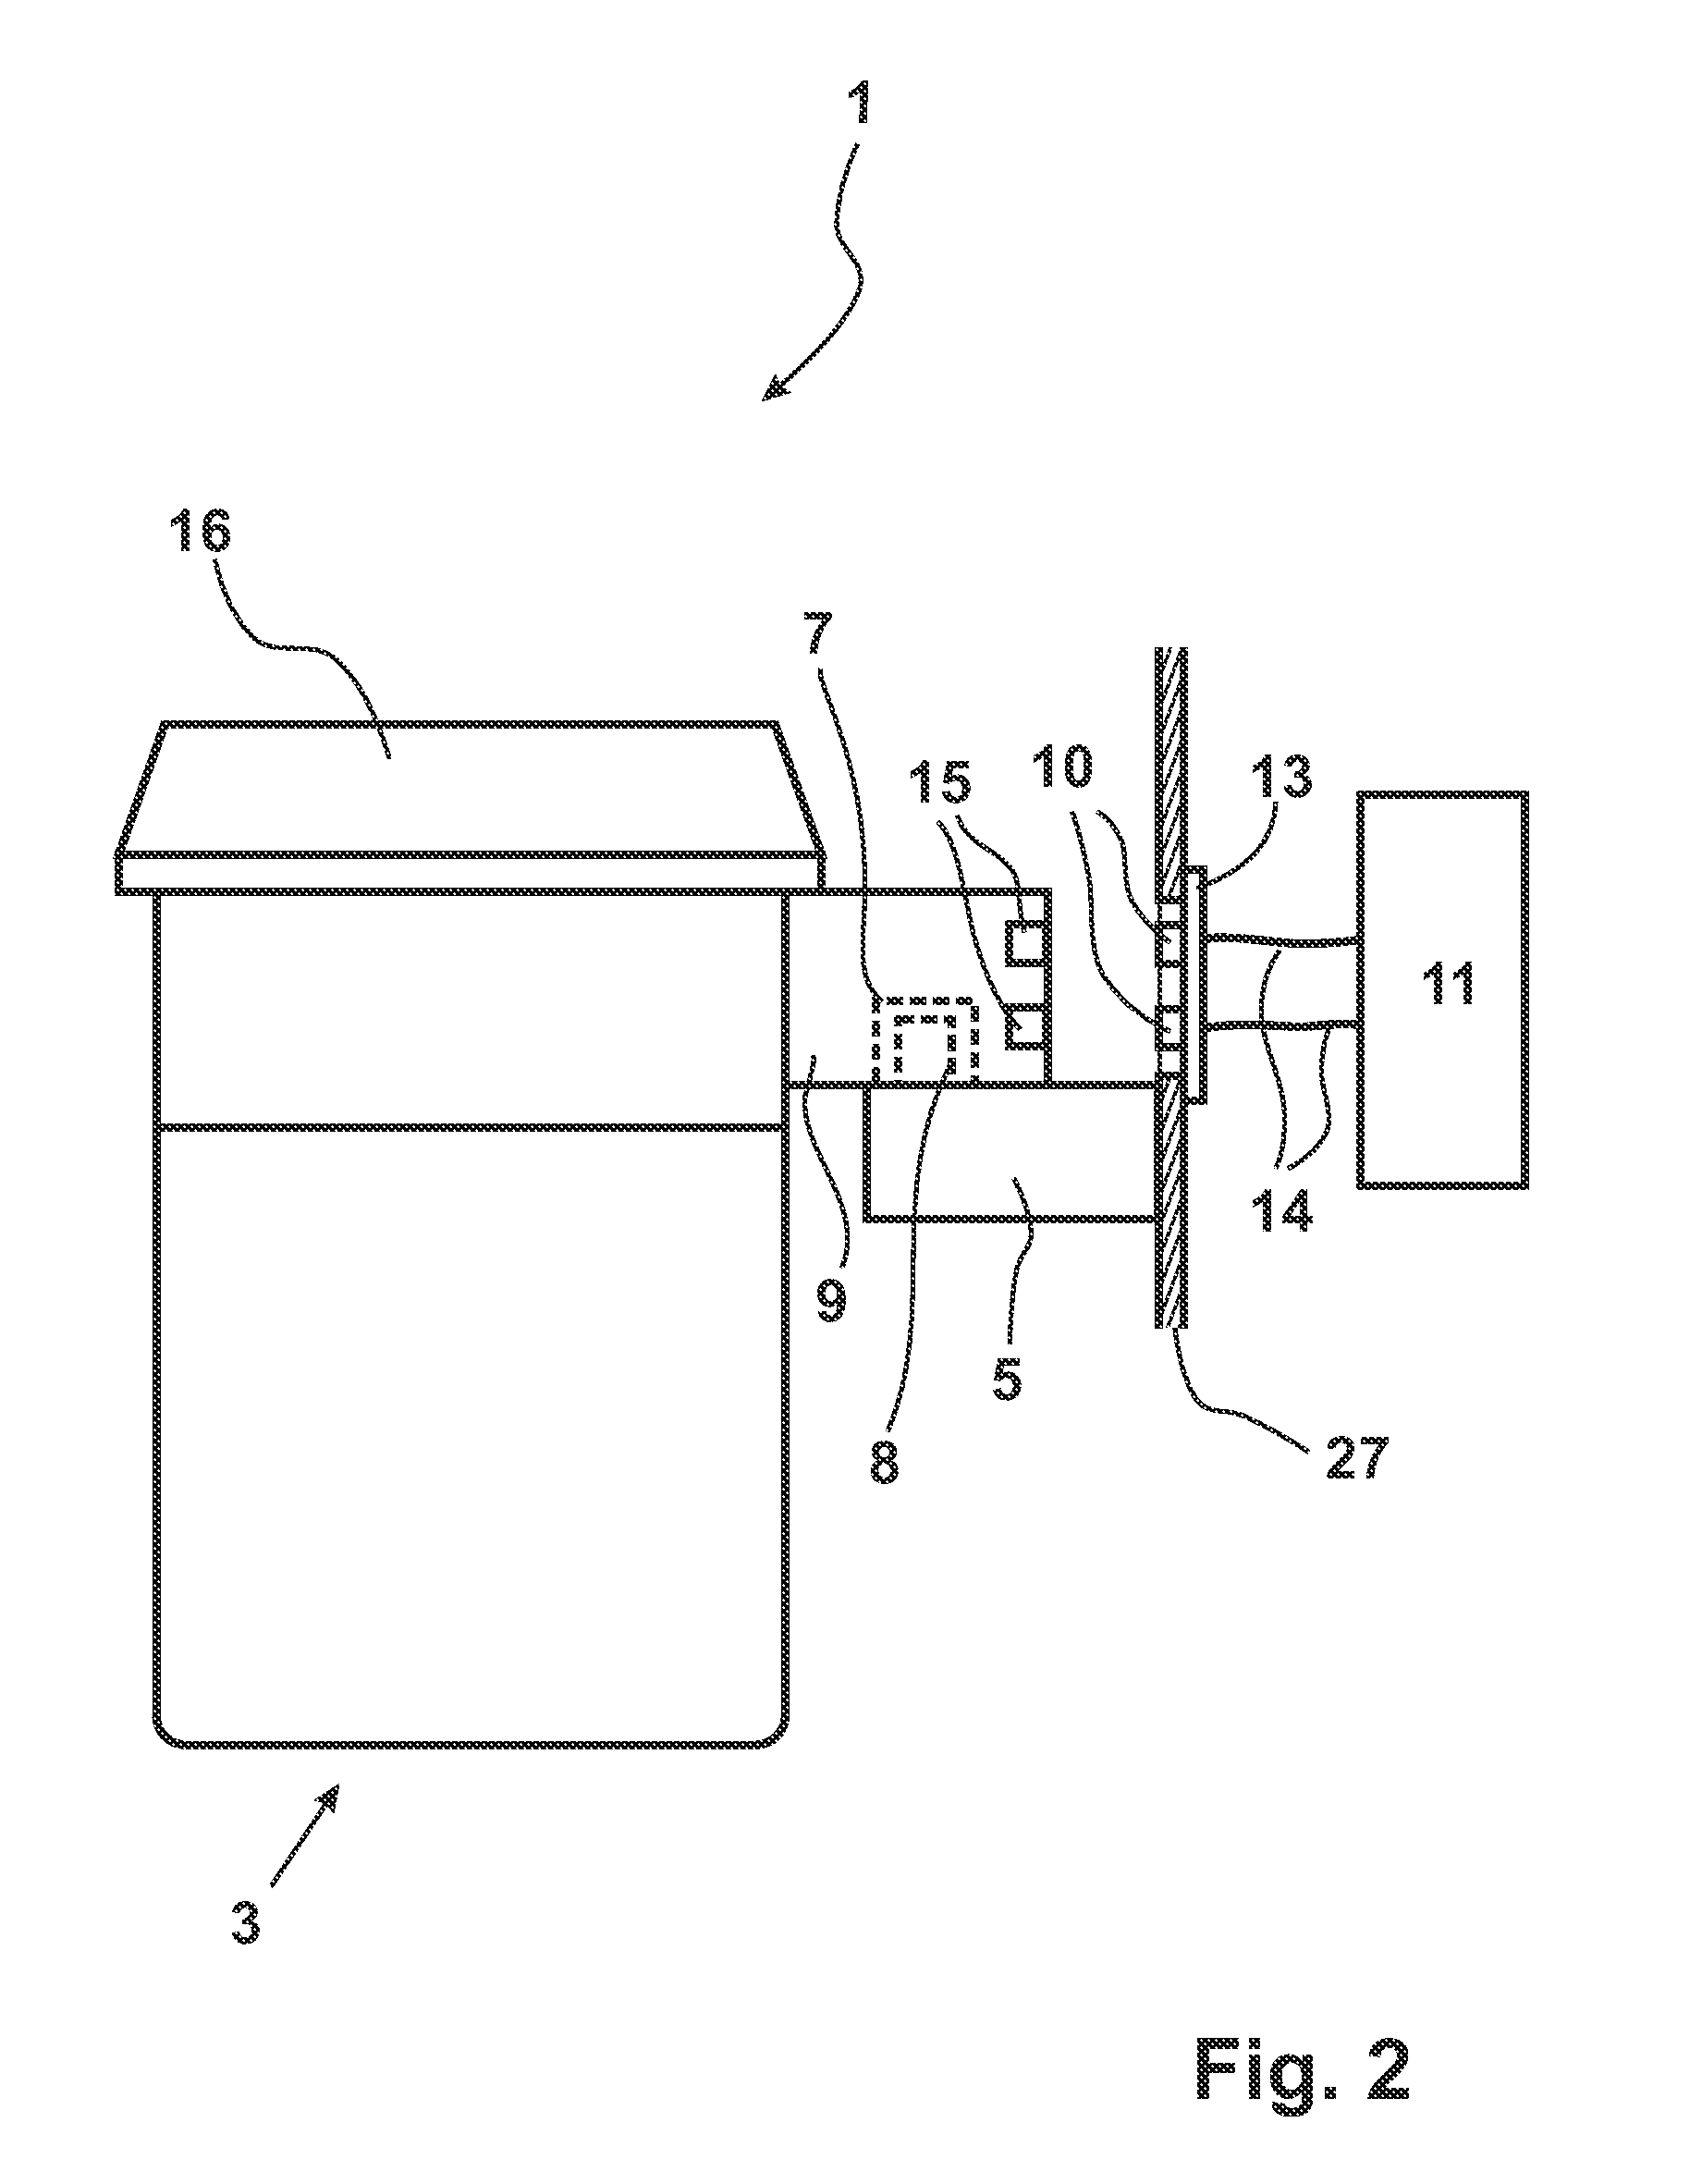 Anesthesia system with detachable anesthetic dispensing device